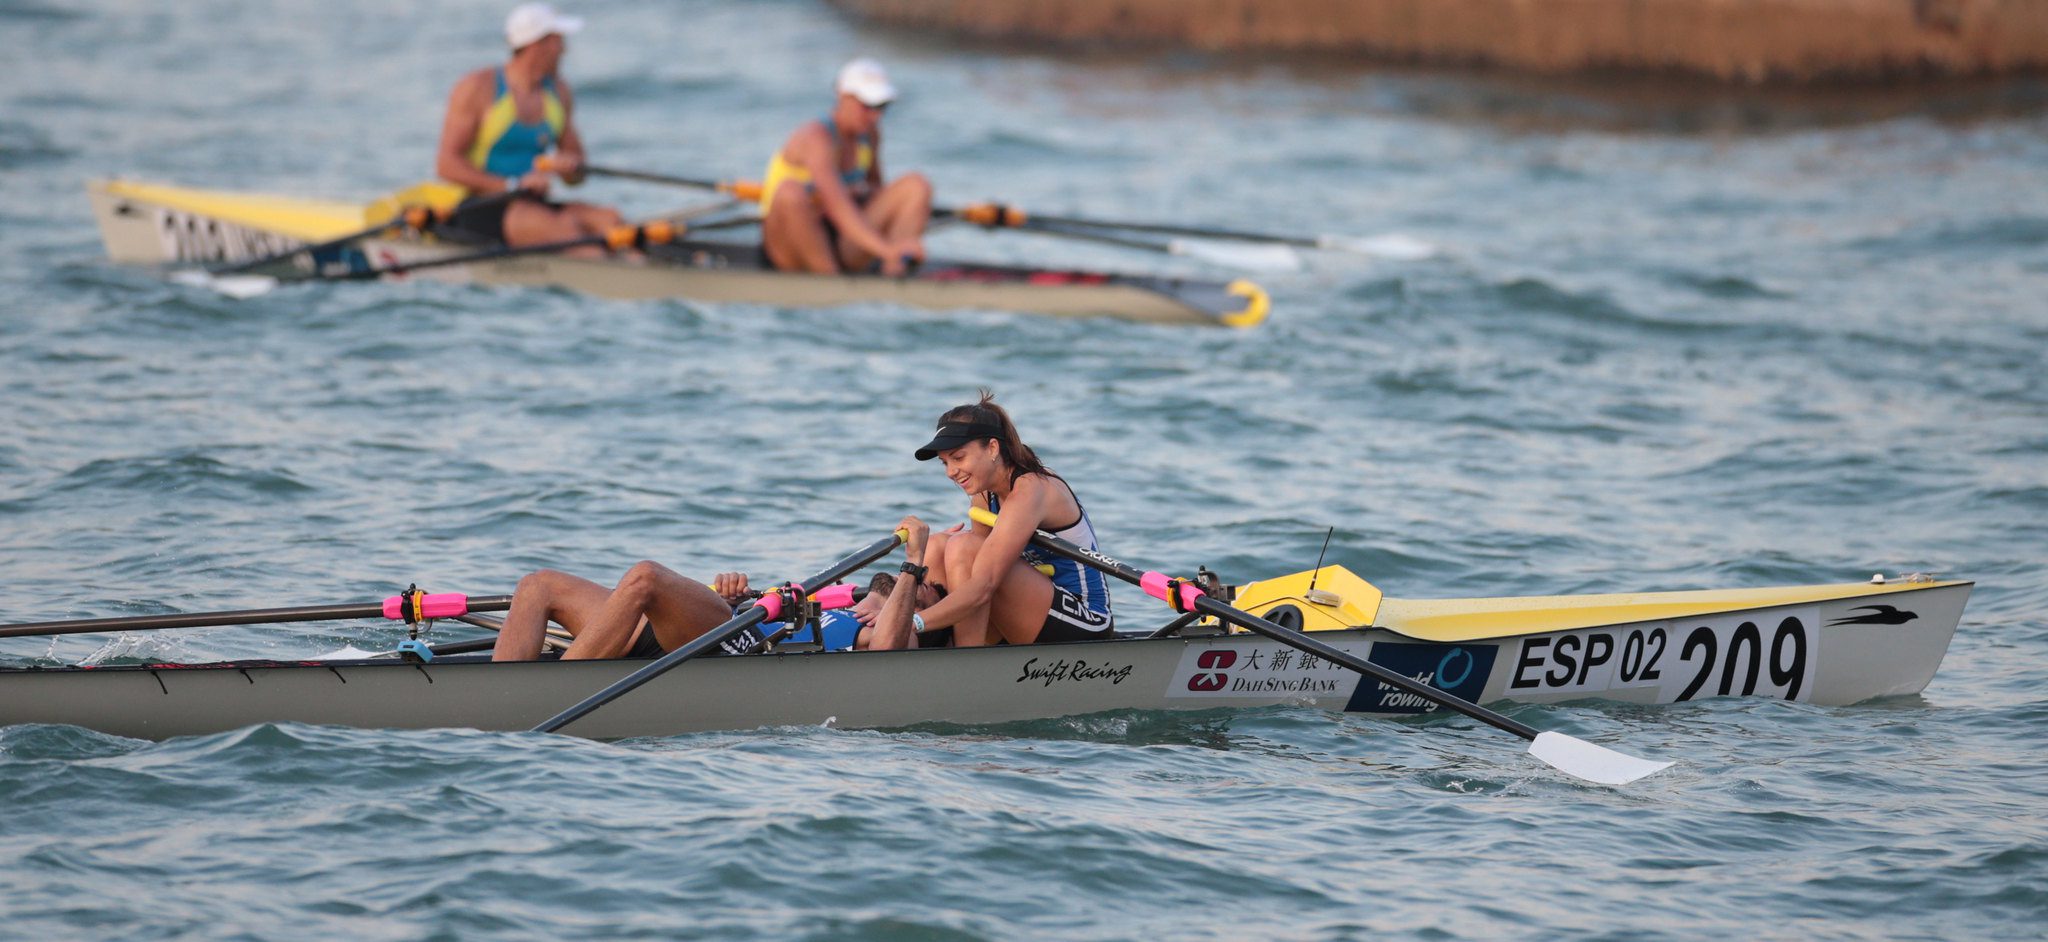 World Rowing Confirms Plans to Propose Coastal Rowing for Paris 2024